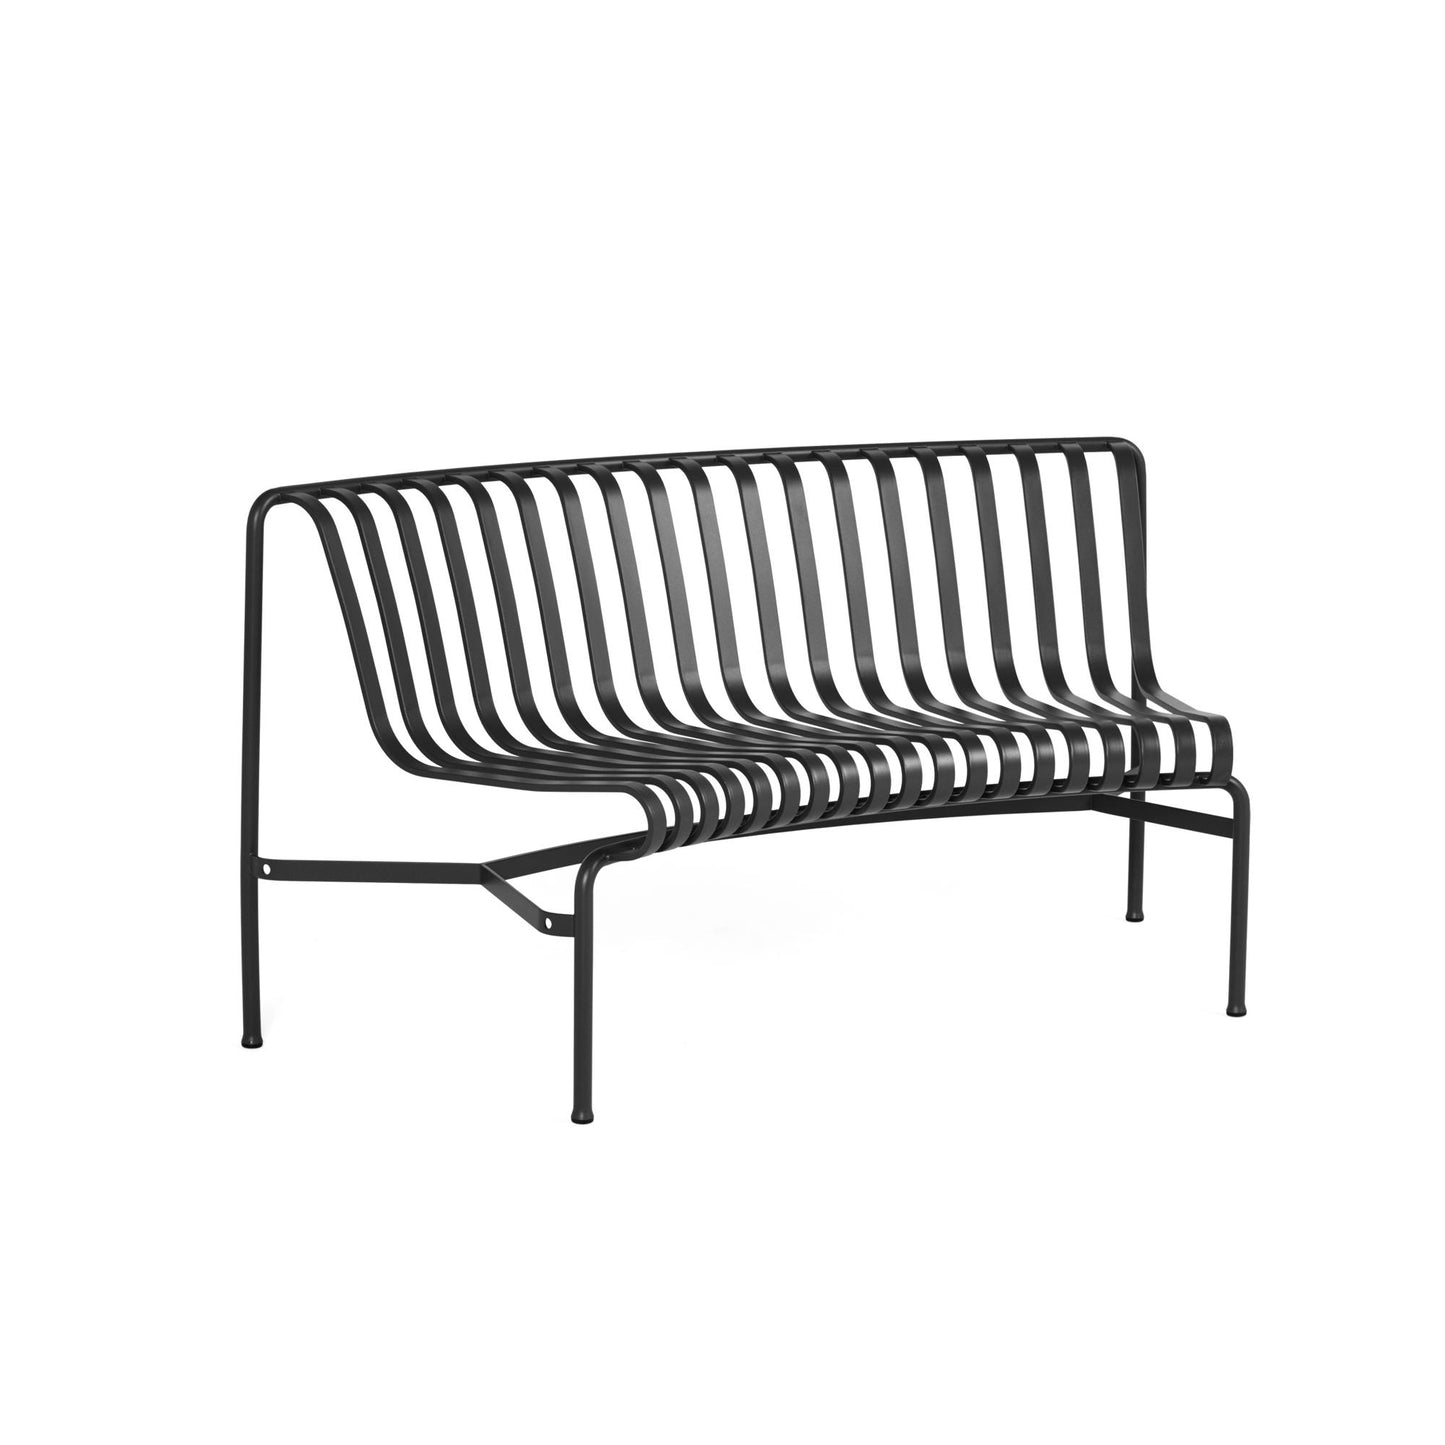 Palissade Park Dining Bench IN 1 Pc. Incl. Mounting Kit Not Freestanding by HAY #Anthracite